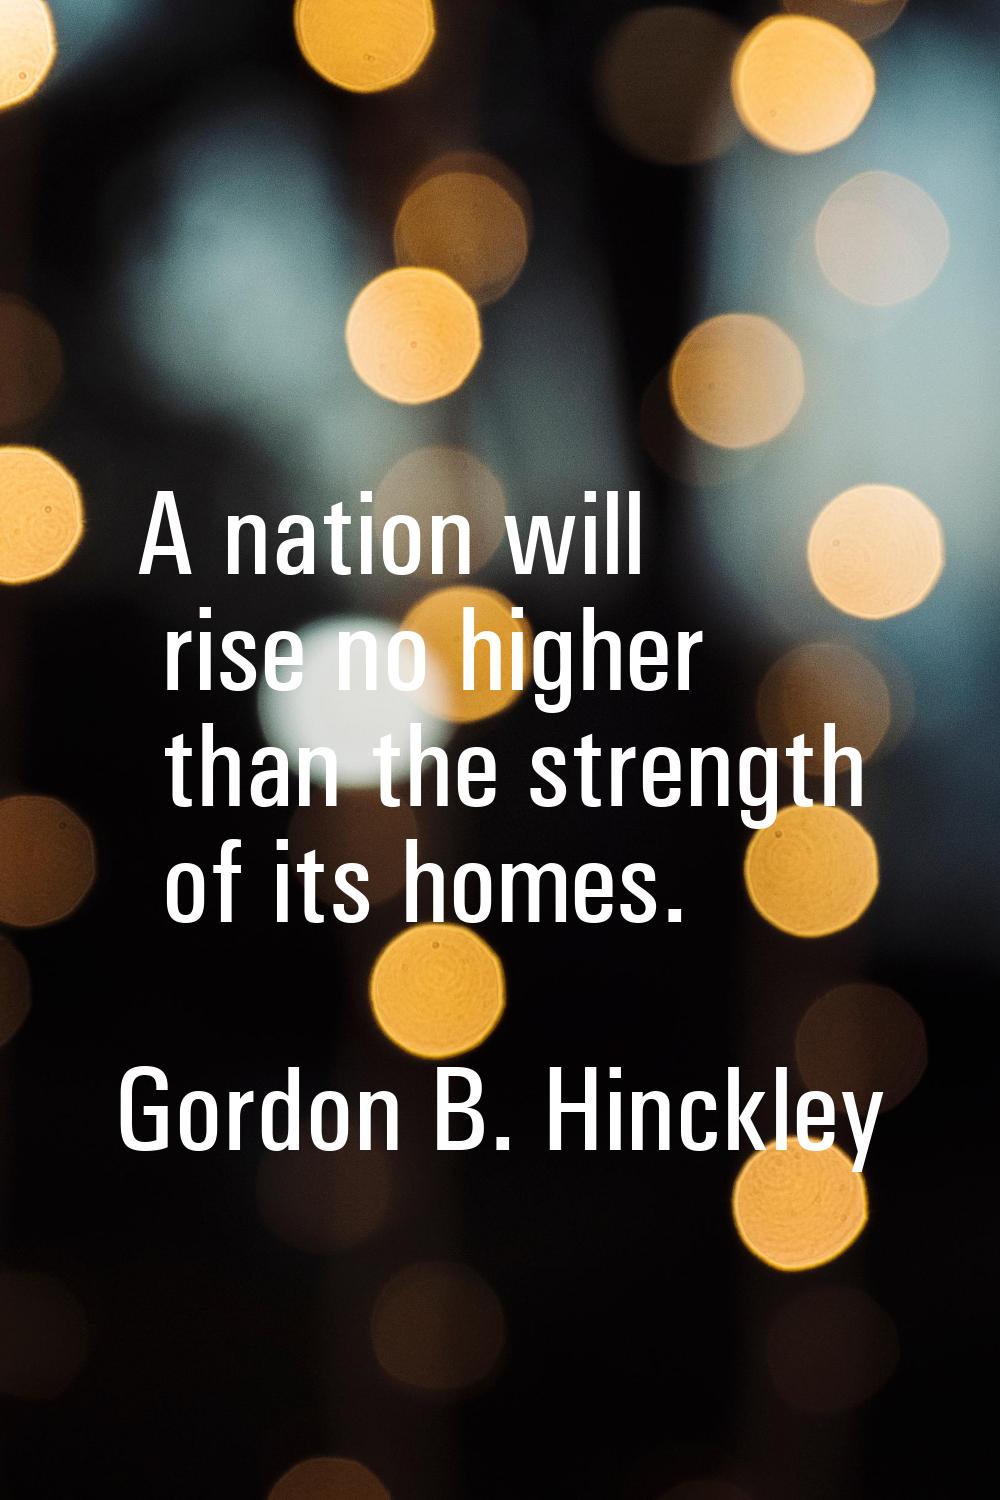 A nation will rise no higher than the strength of its homes.